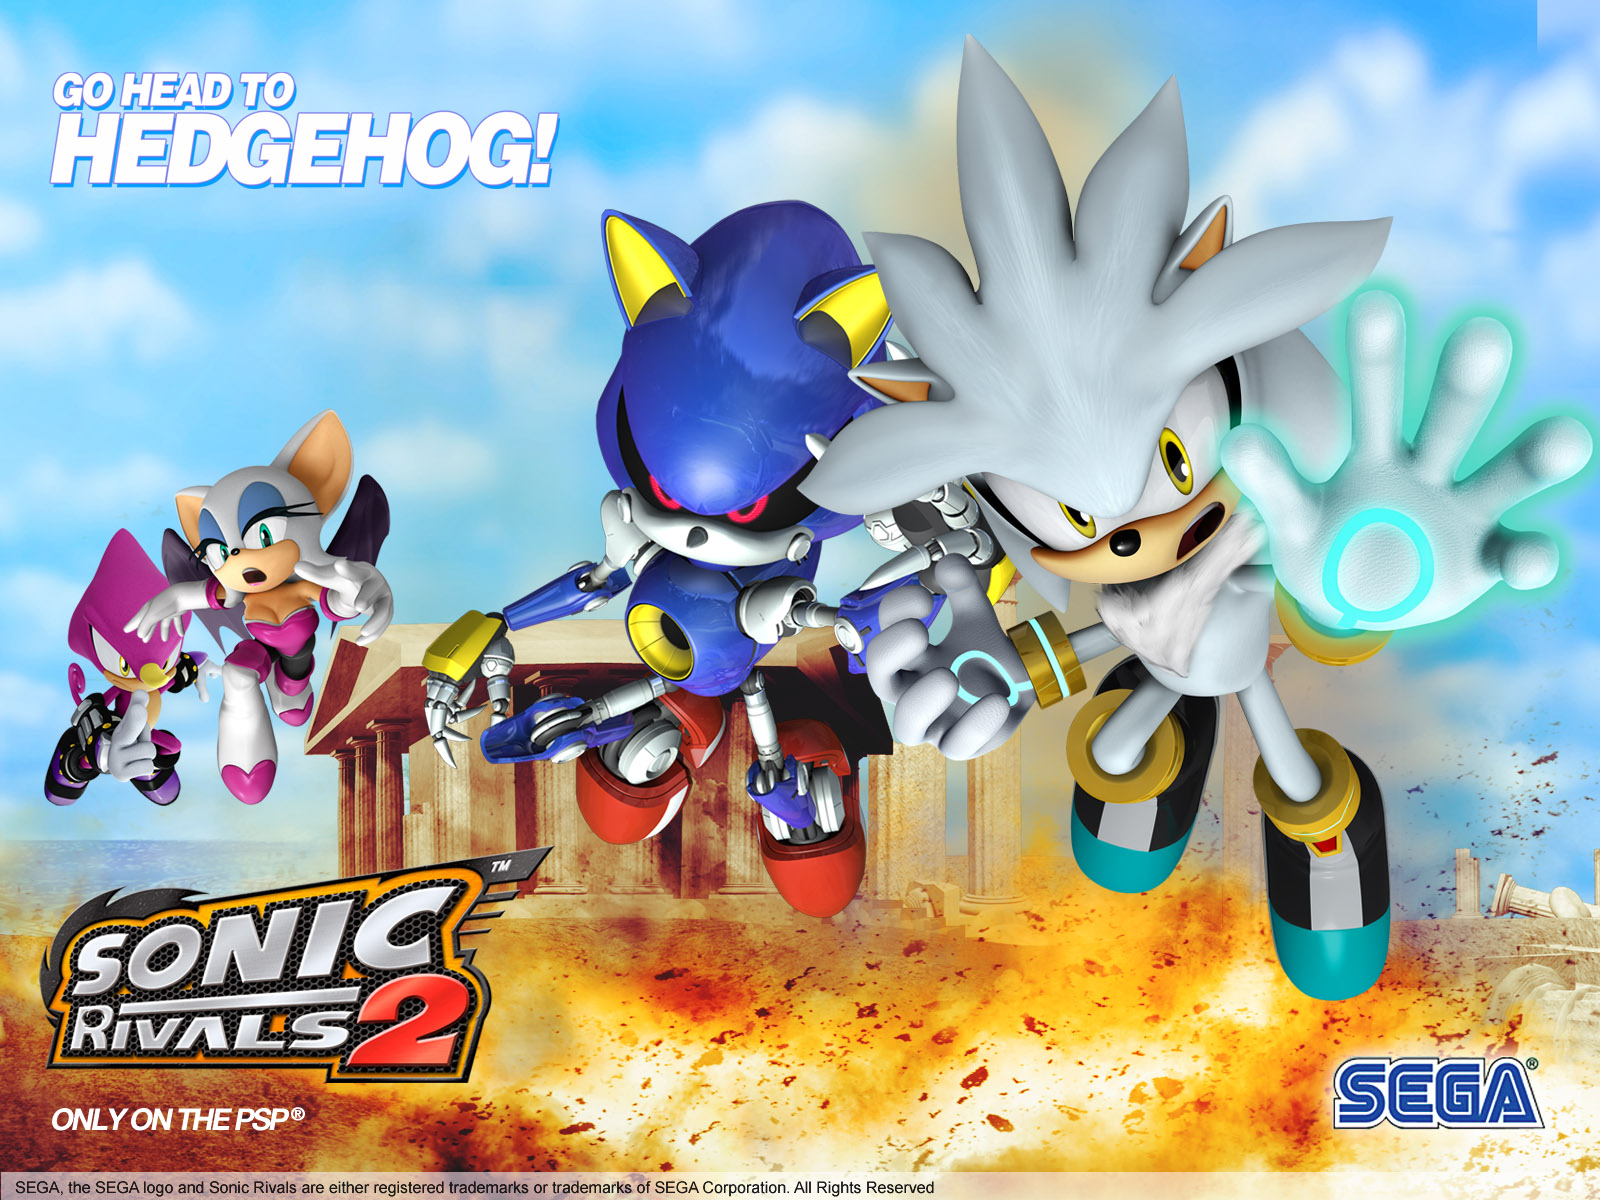 Video Game Sonic Rivals 2 HD Wallpaper | Background Image